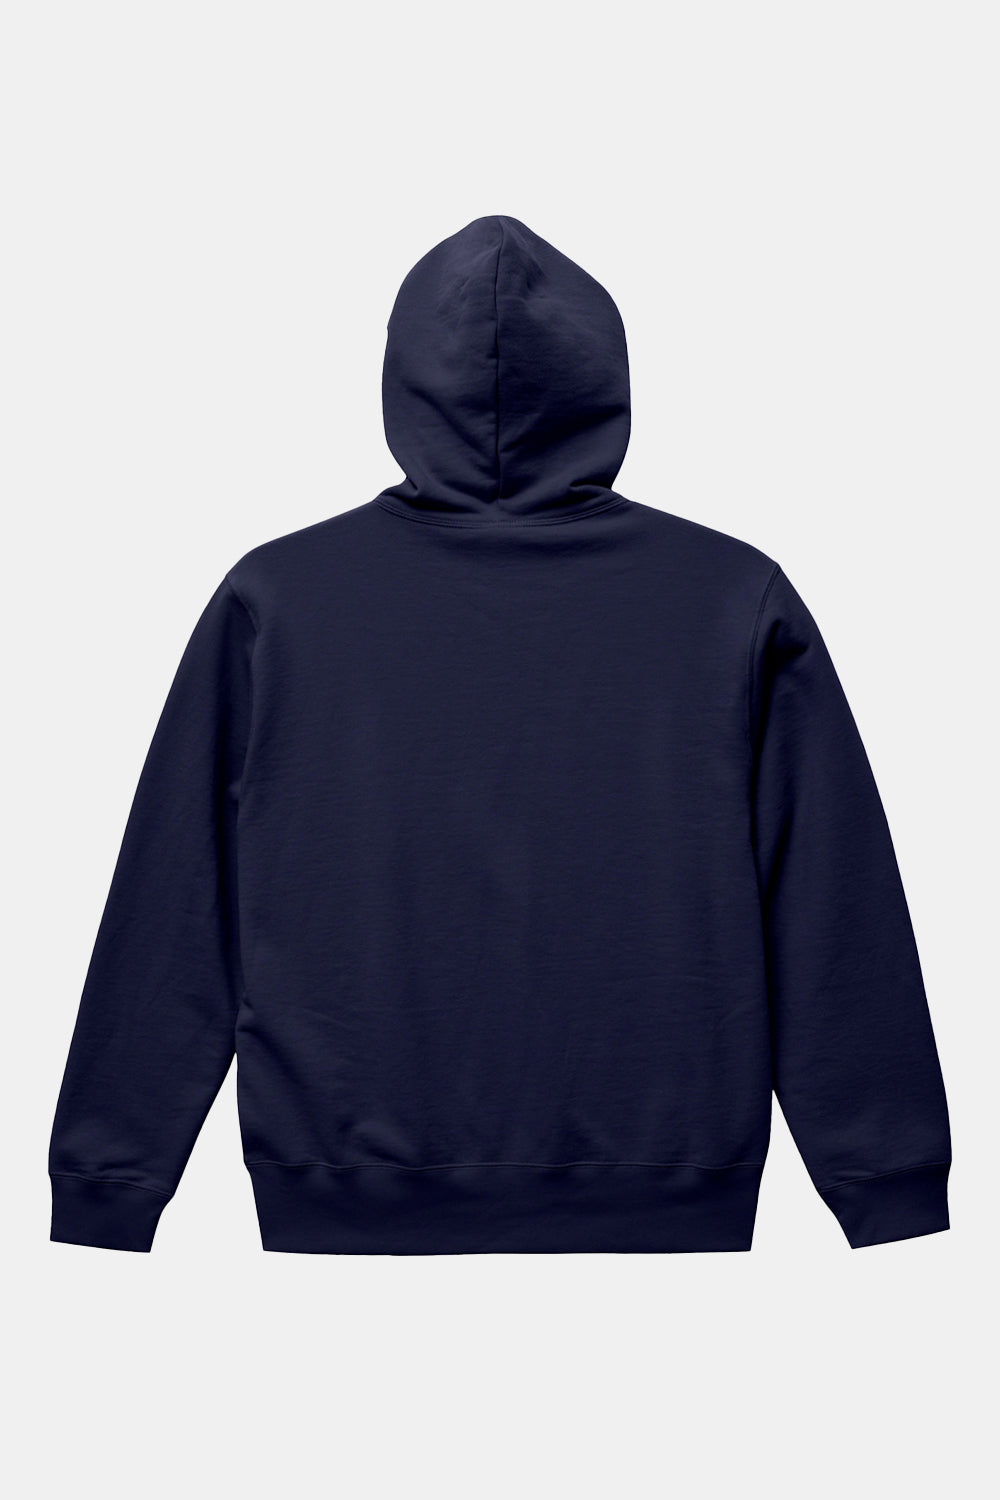 United Athle 5214 10.0oz Sweat Pullover Hoodie (Navy)